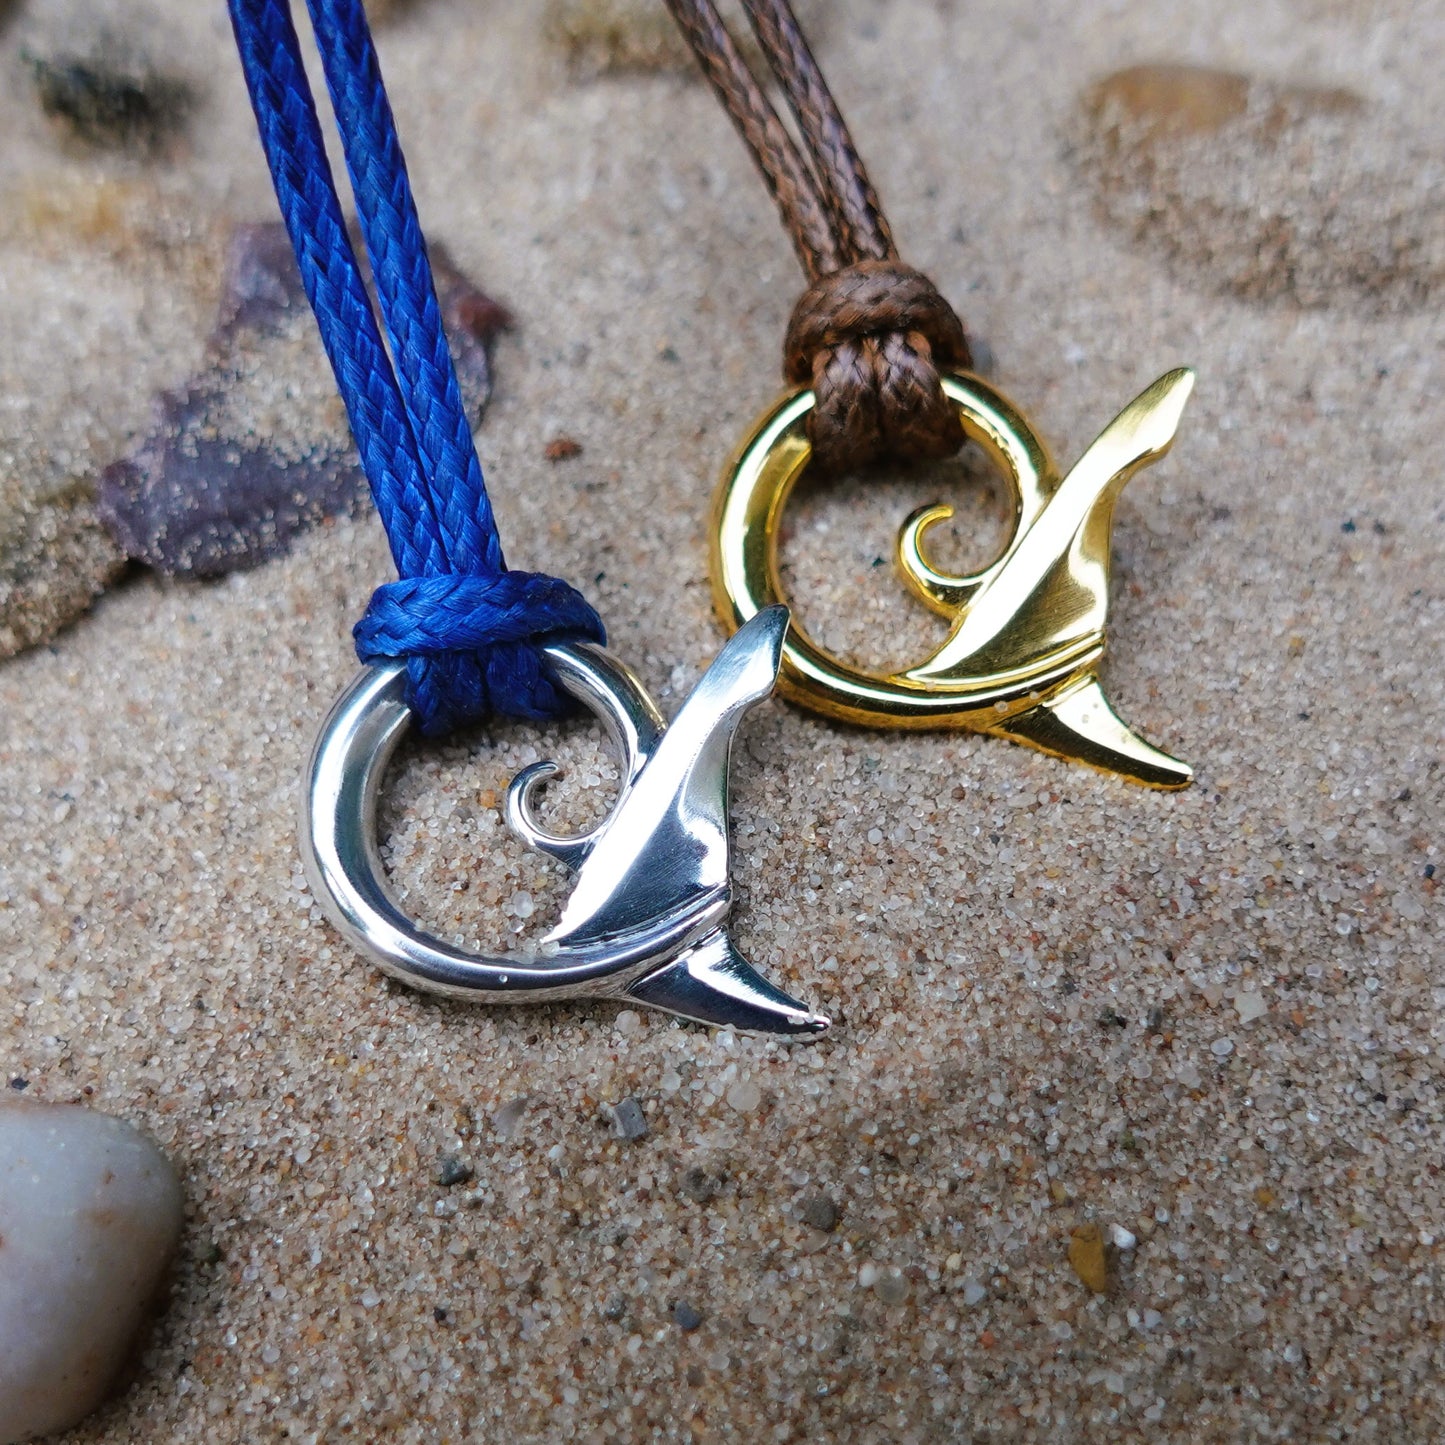 Shark tail necklace. Solid yellow gold shark's tail design. This piece will be handmade for you. © Adrian Ashley